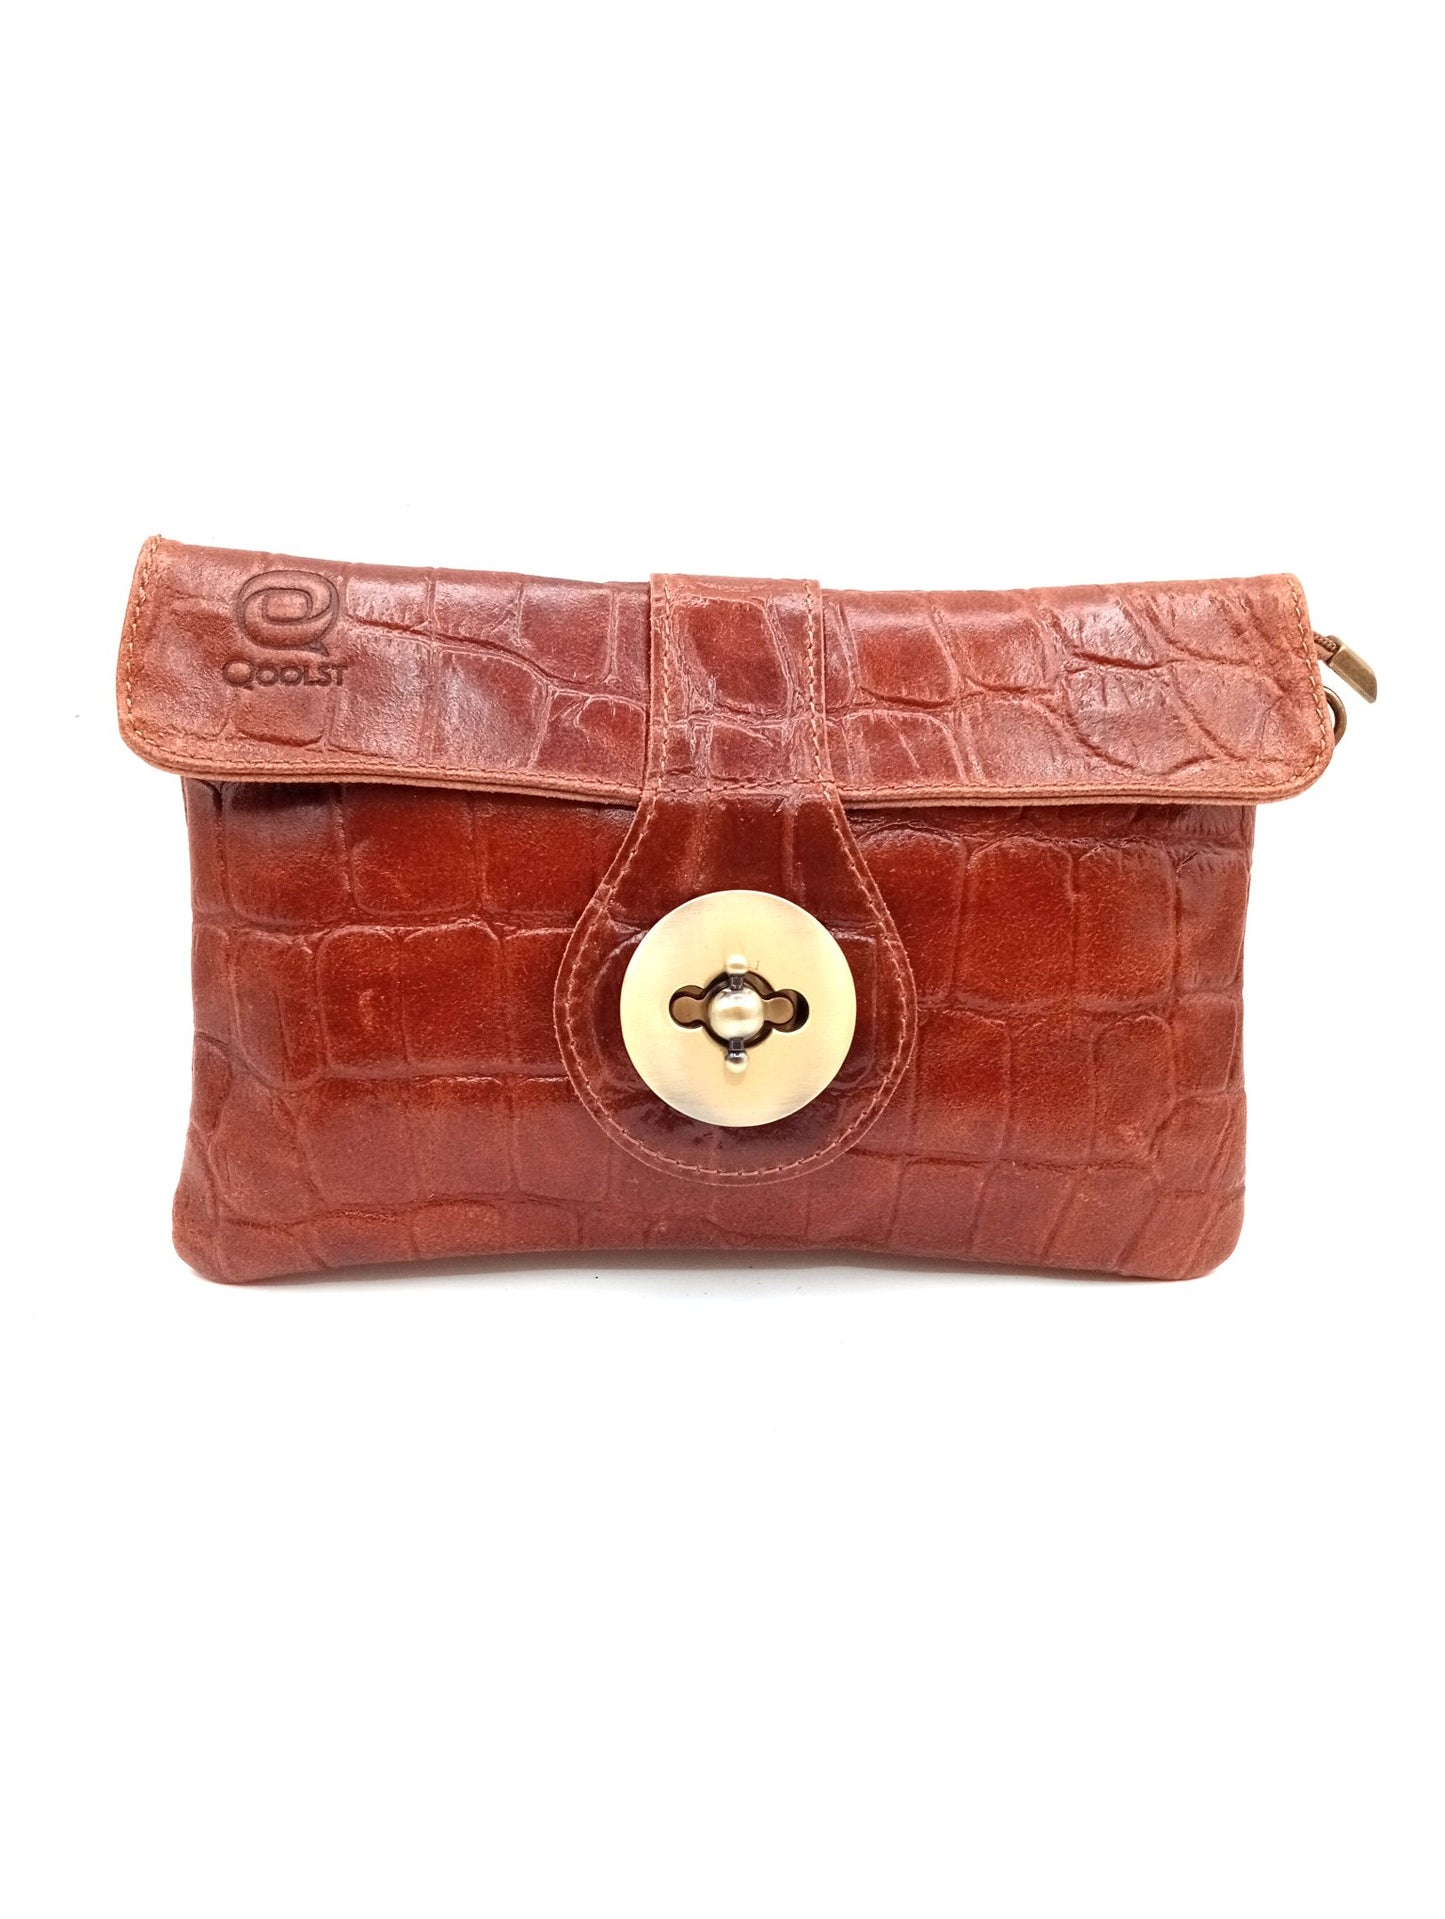 Women's leather wallet bag with Qoolst crocodile engraved metal clasp